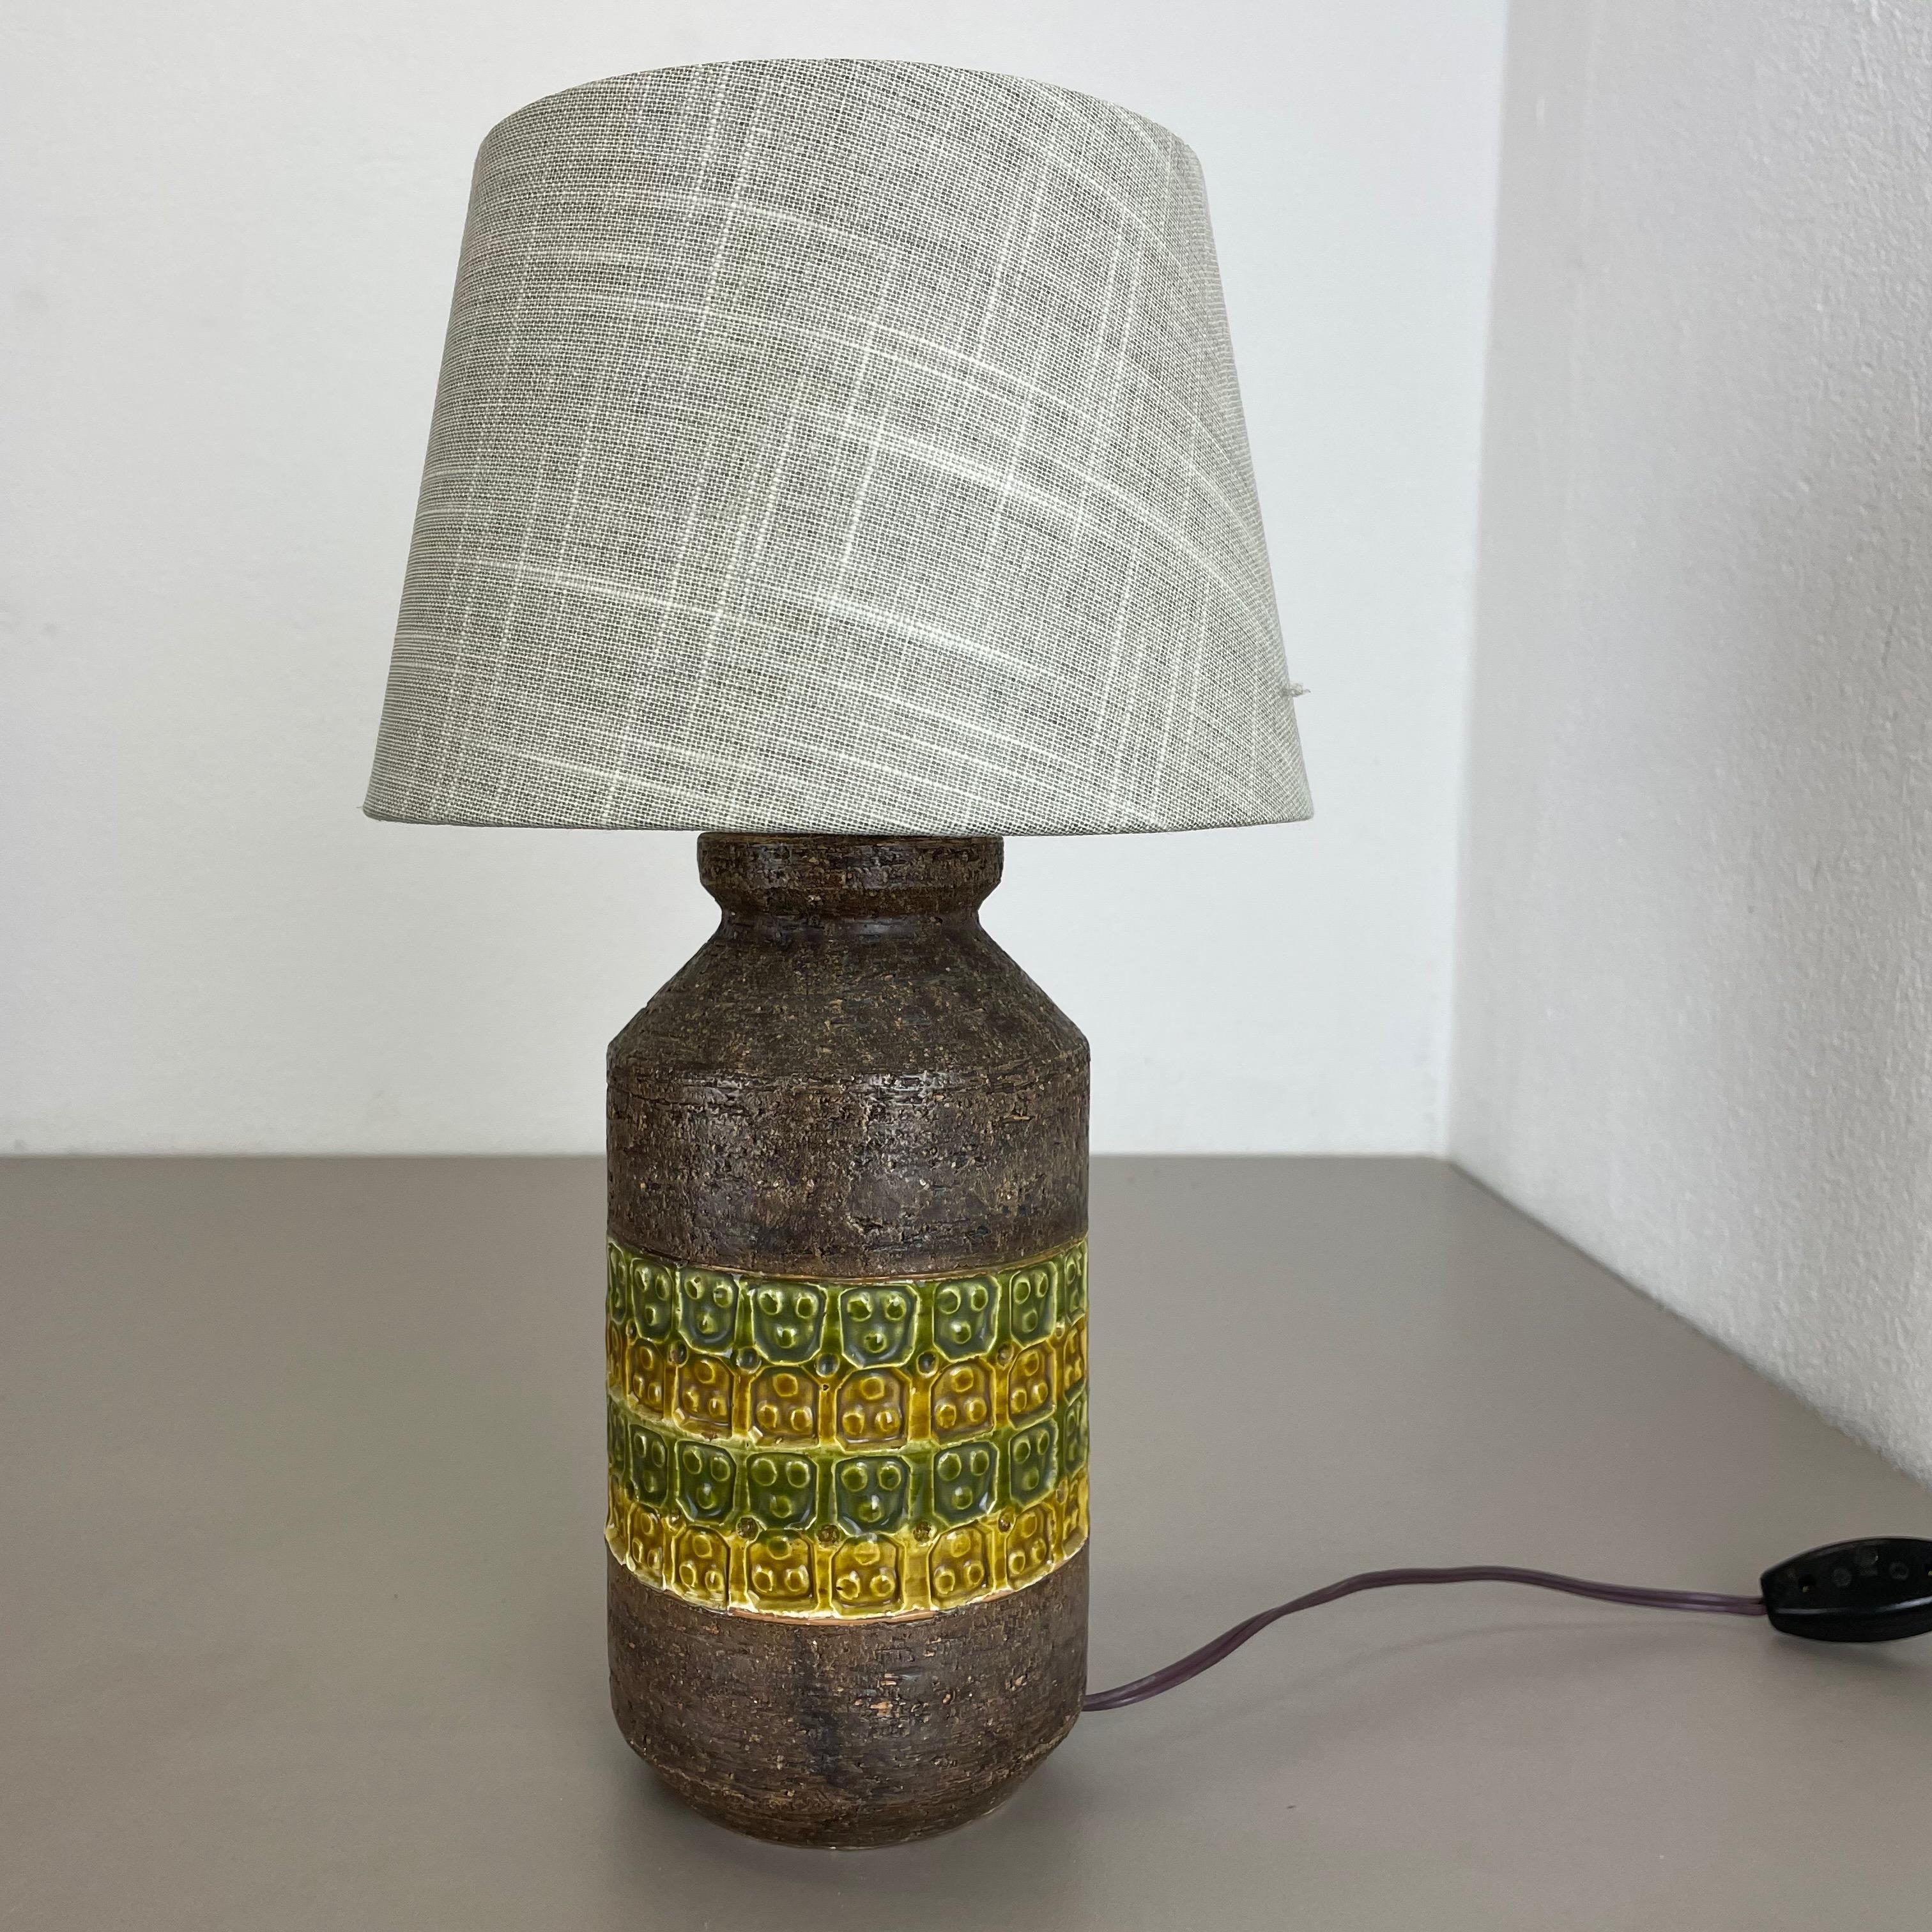 Article:

Ceramic table light base


Producer:

BITOSSI, Italy



Decade:

1970s



This original vintage ceramic Pottery light base was produced by BITOSSI in Italy
in the 1970s. It is made of solid pottery and has coloration in